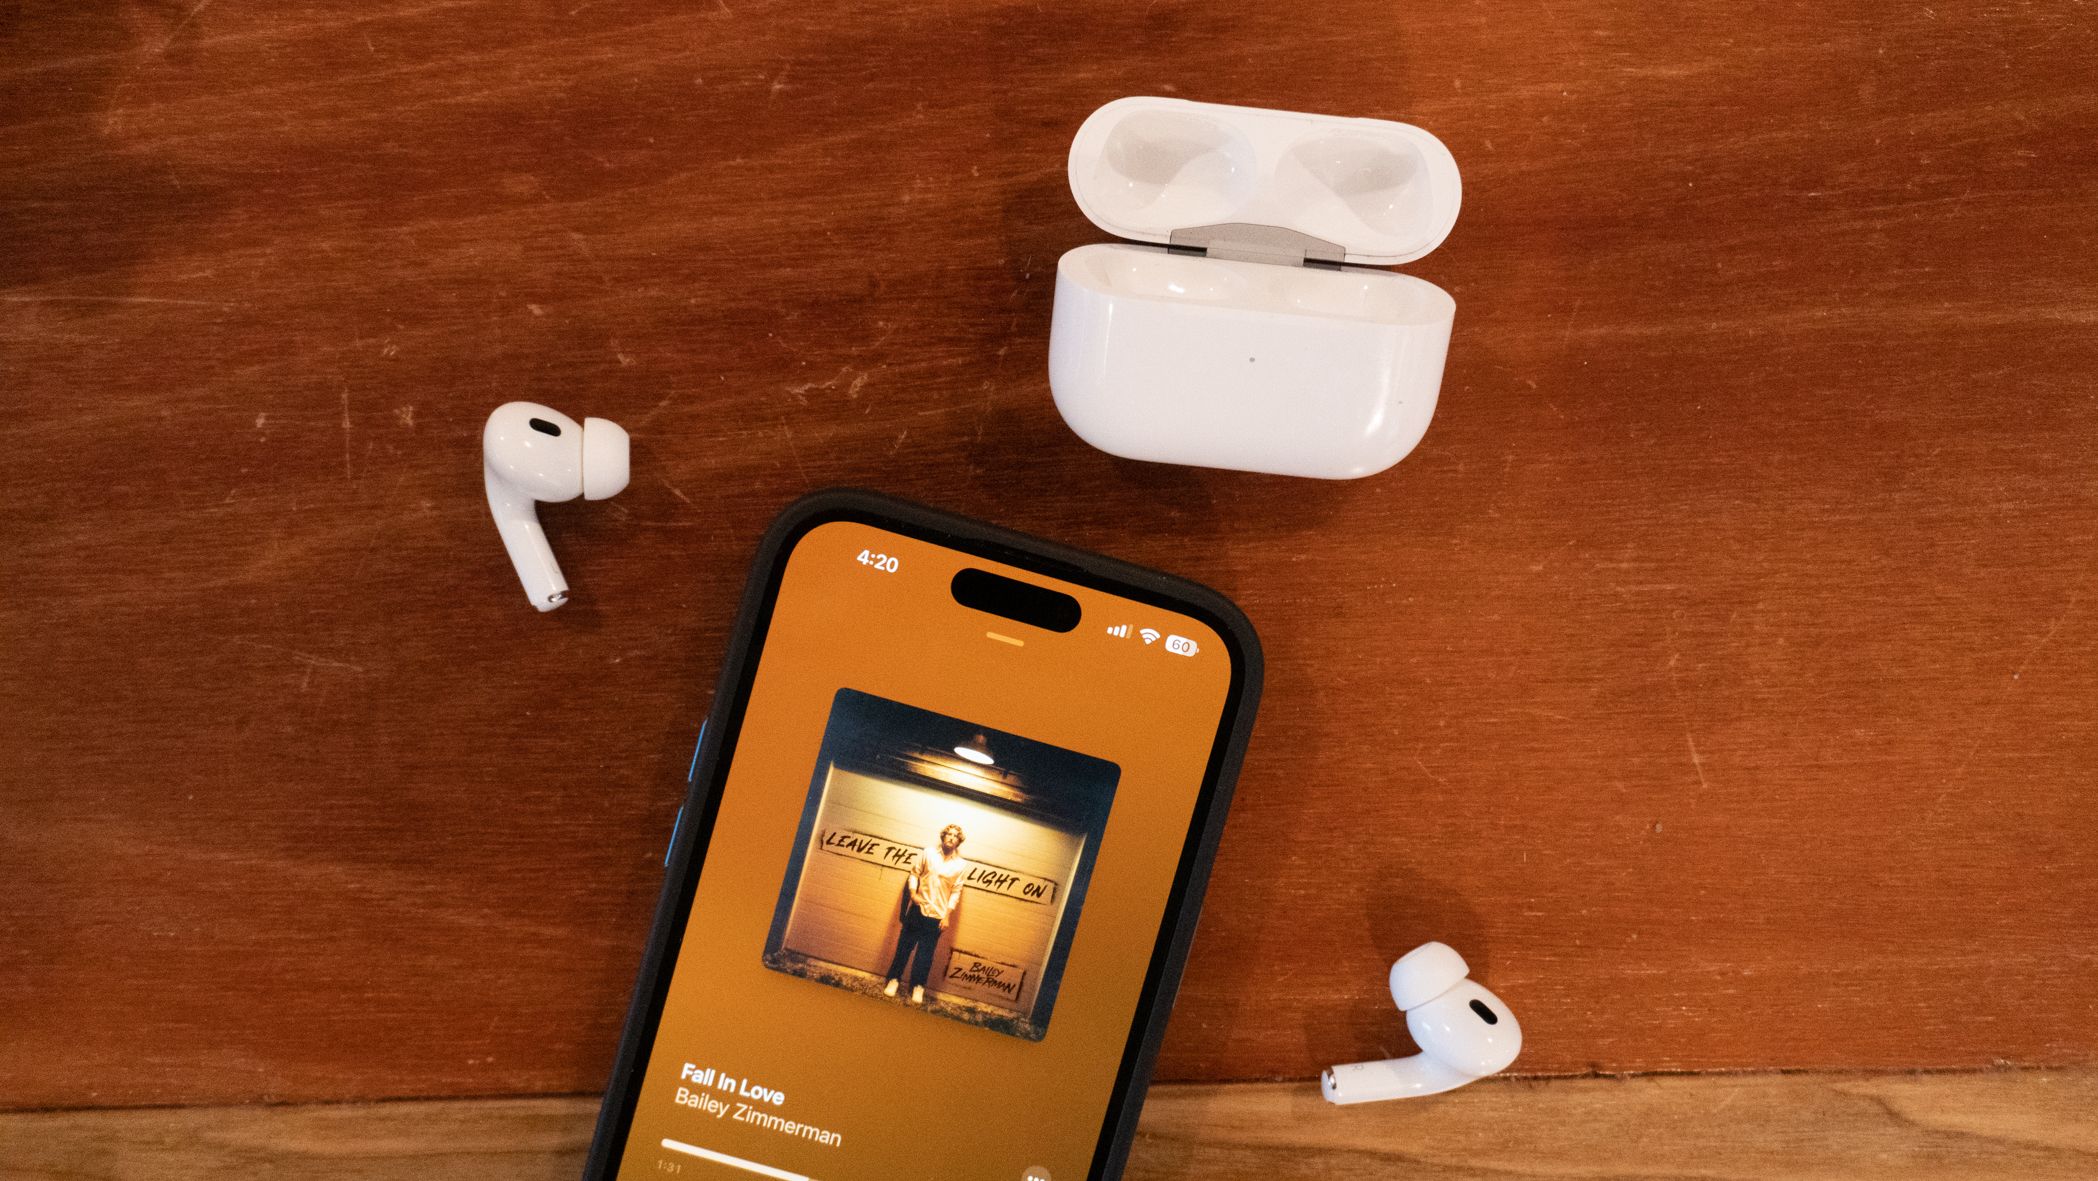 Apple AirPods Pro 2 vs Samsung Galaxy Buds 2 Pro - Reviewed